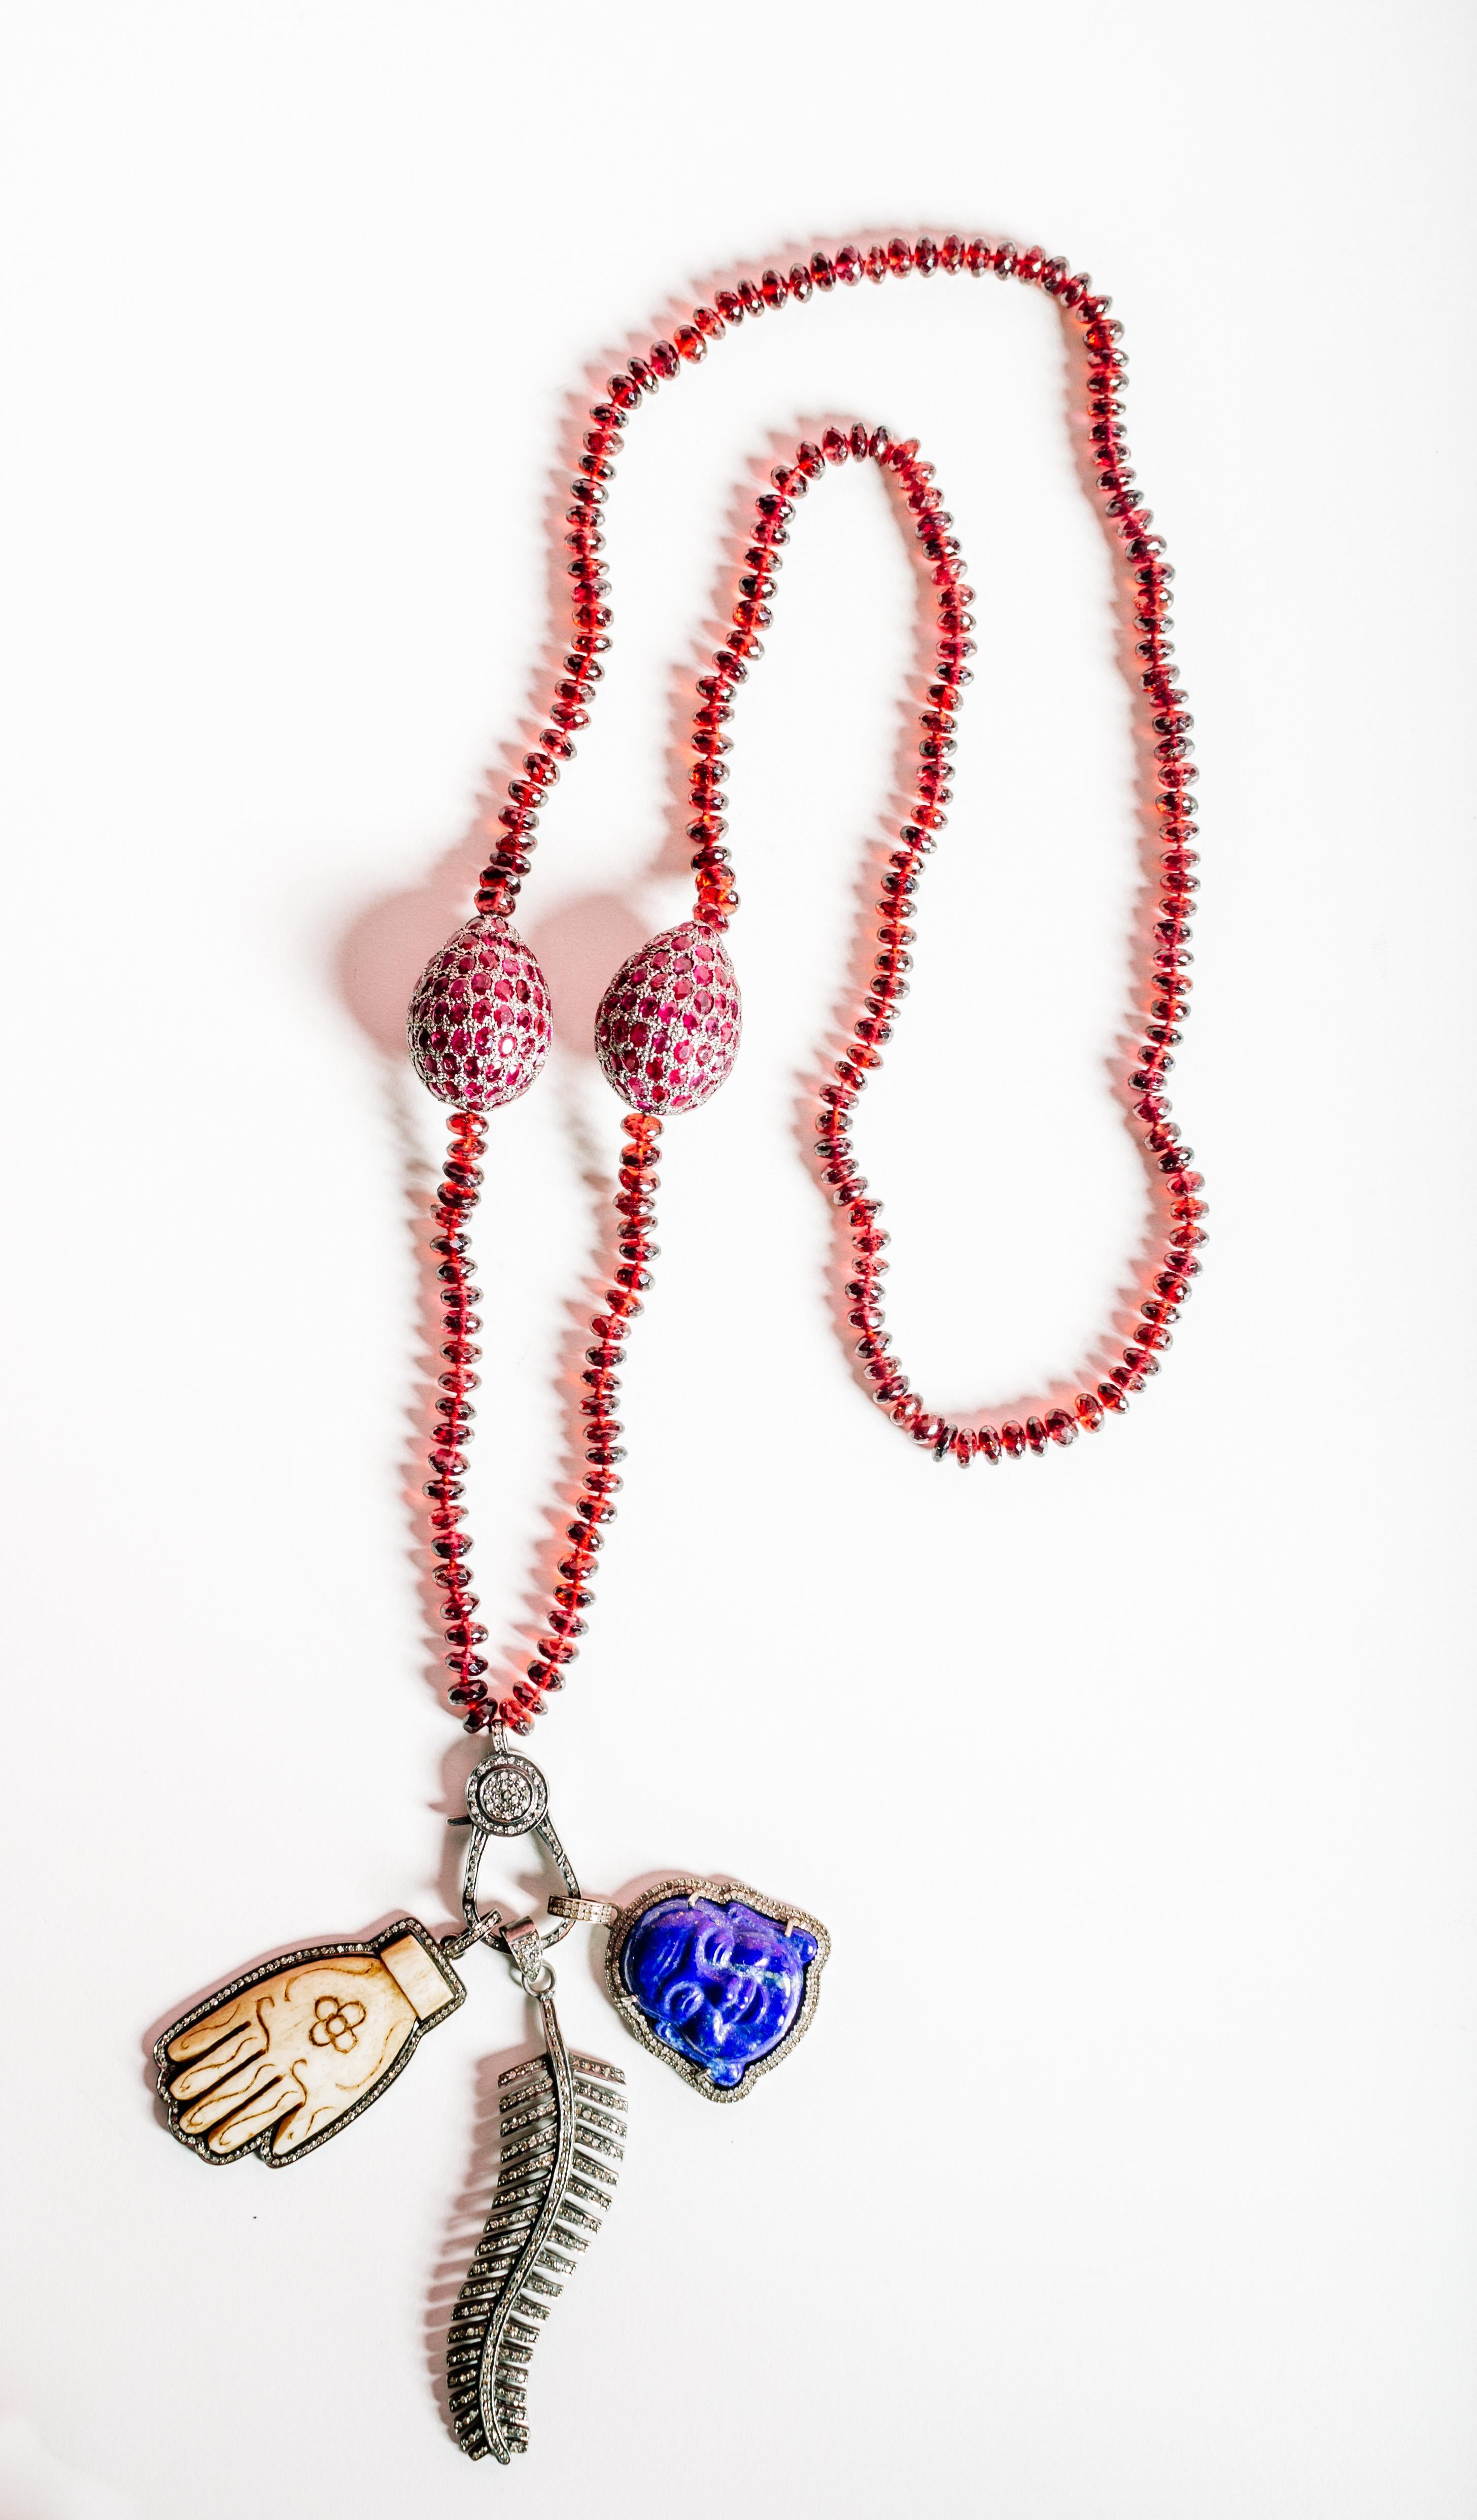 Beaded garnet necklace with ruby and diamond tumbler beads, silver and diamond clasp. Clasp allows for pendants to be removed/interchanged. 37